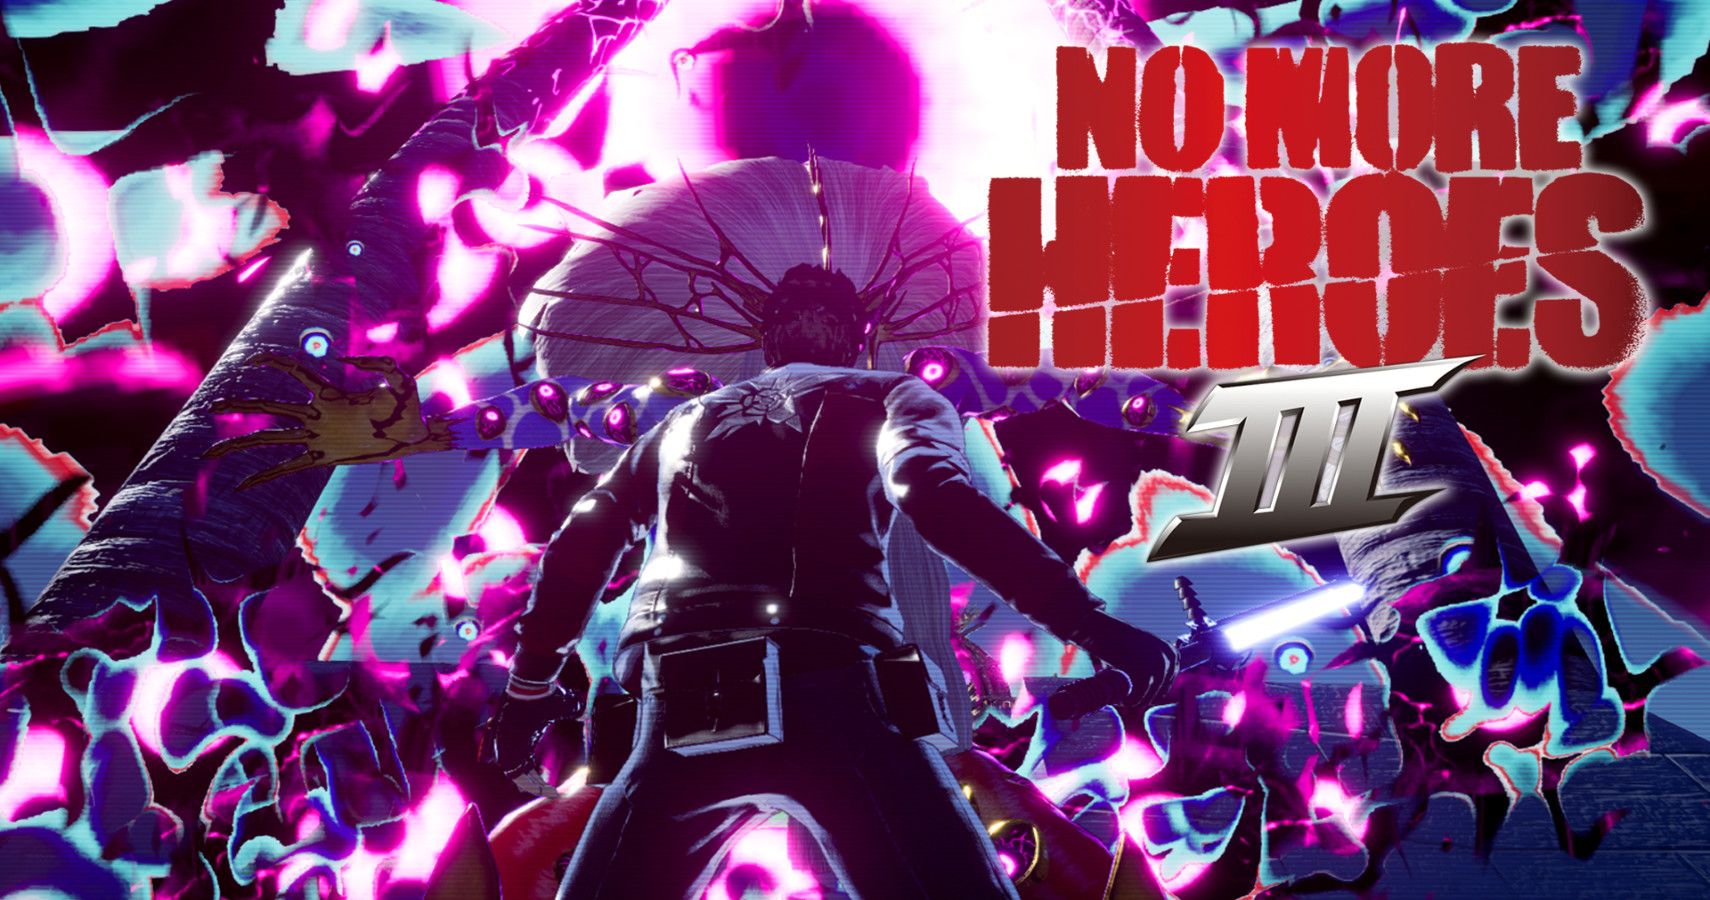 No More Heroes 3 Features Artists From Bayonetta, Punpun, The Boys